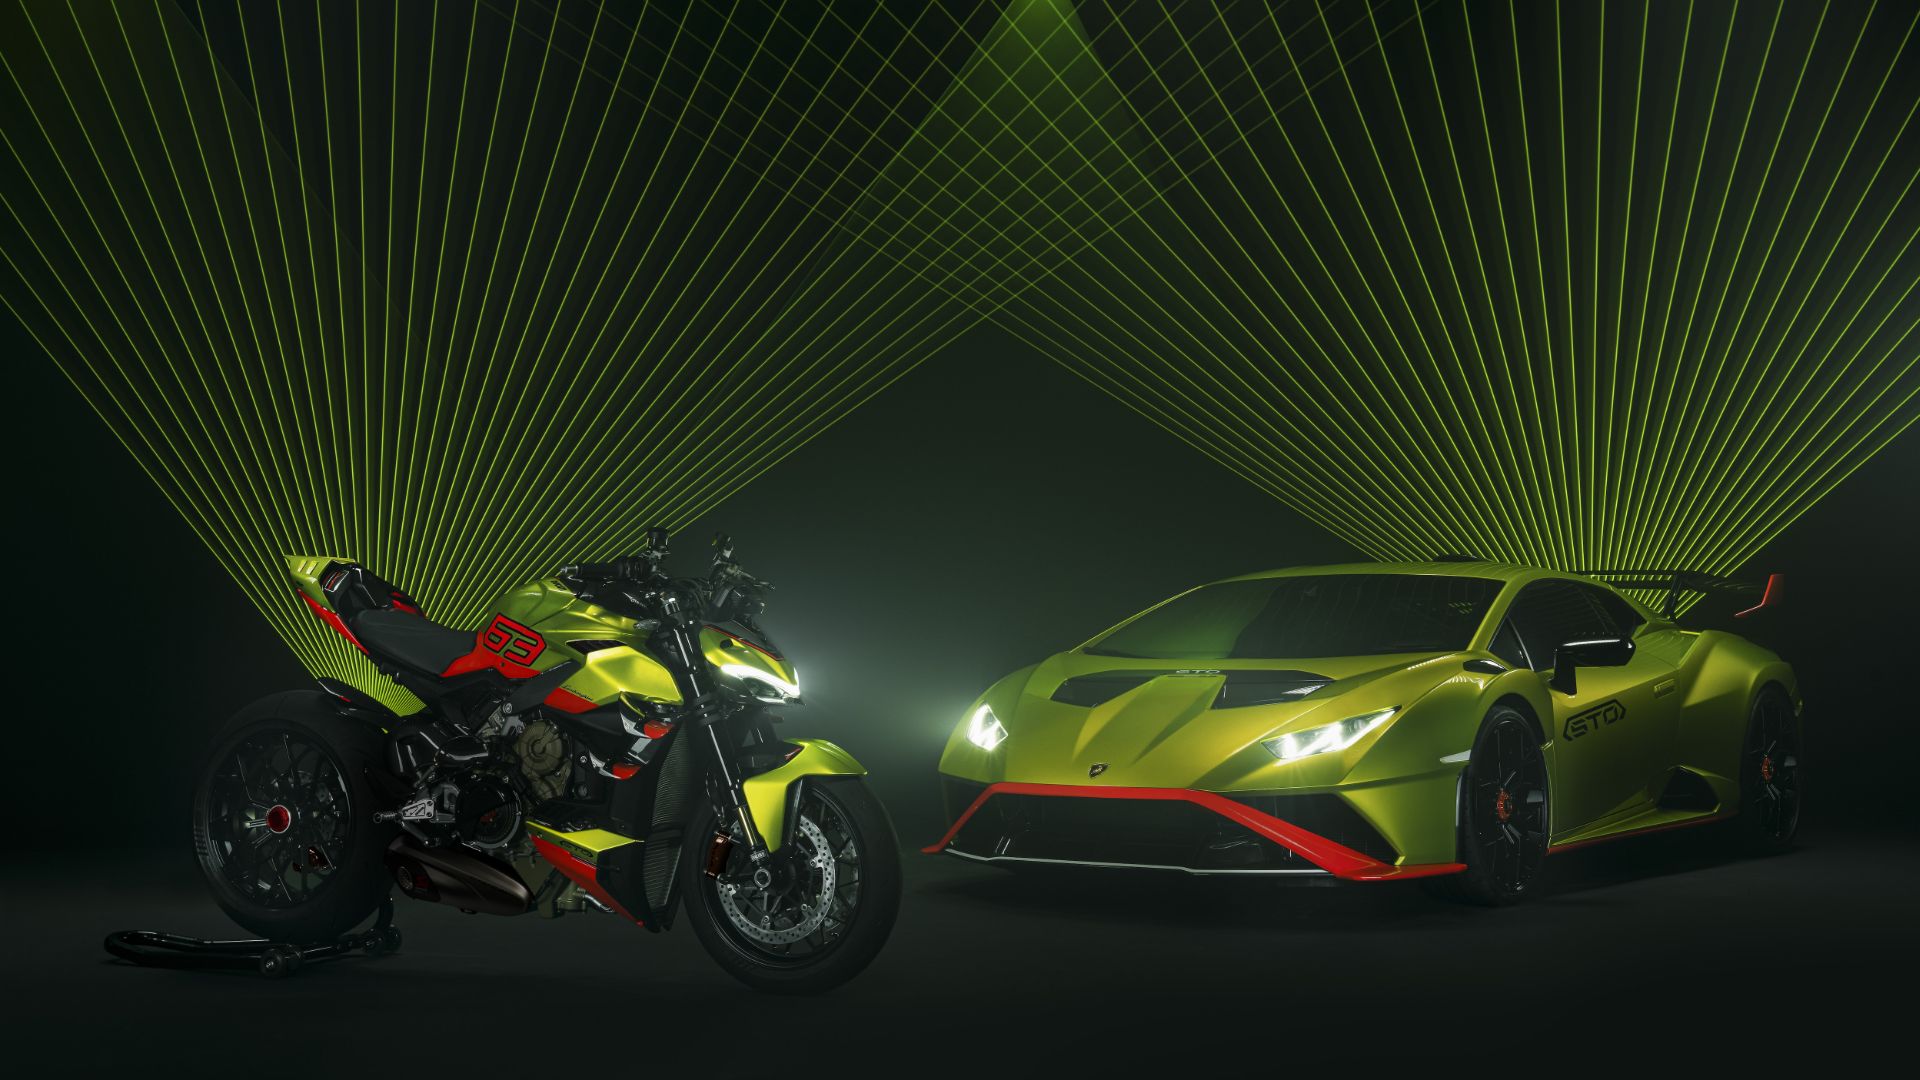 Ducati Streetfighter V4 Lamborghini: extreme combination of sportiness, exclusivity and appeal.